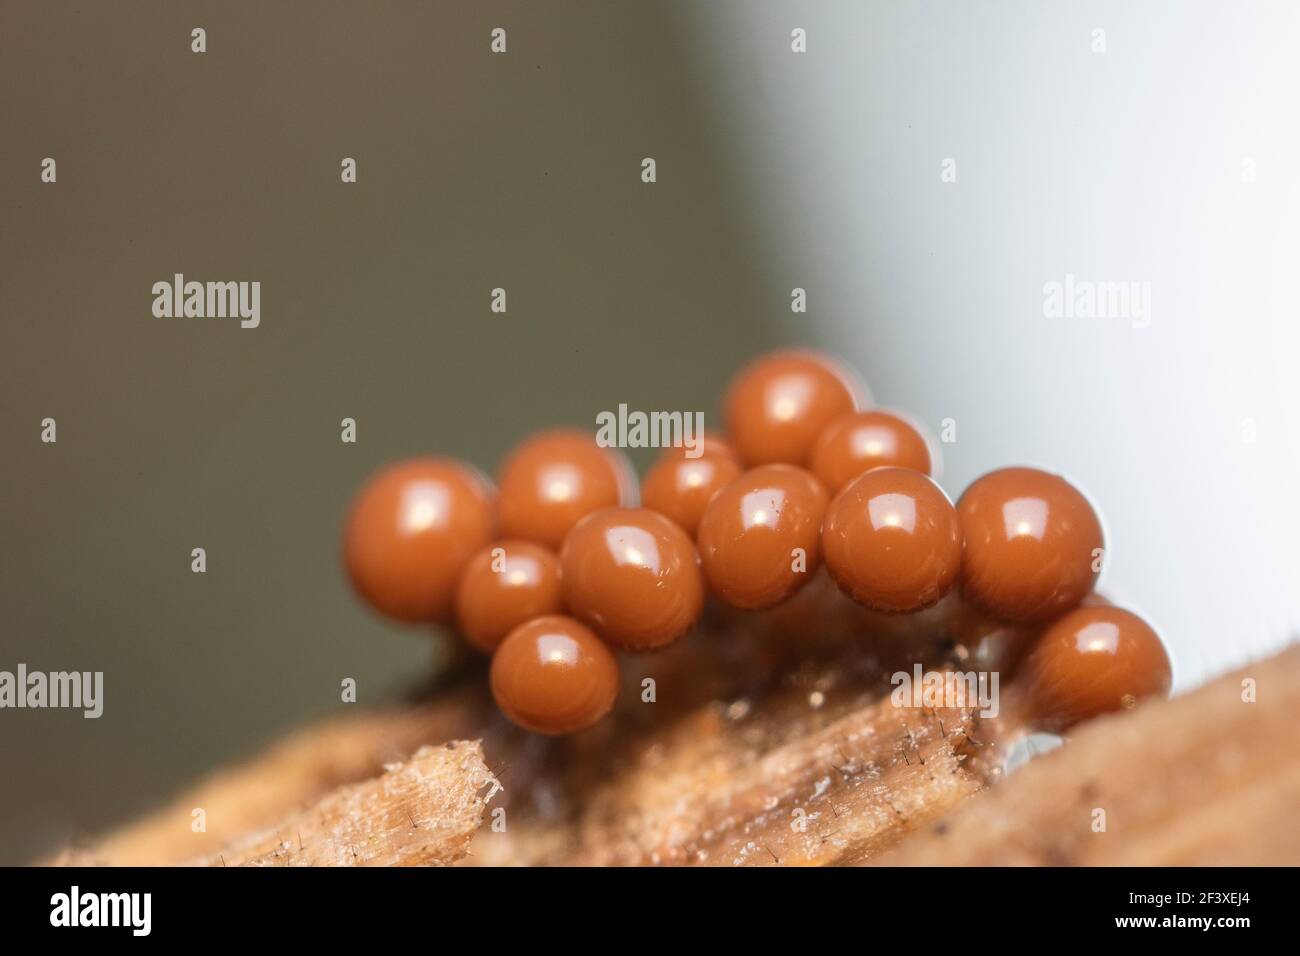 Slime mold on decaying wood in autumn Stock Photo